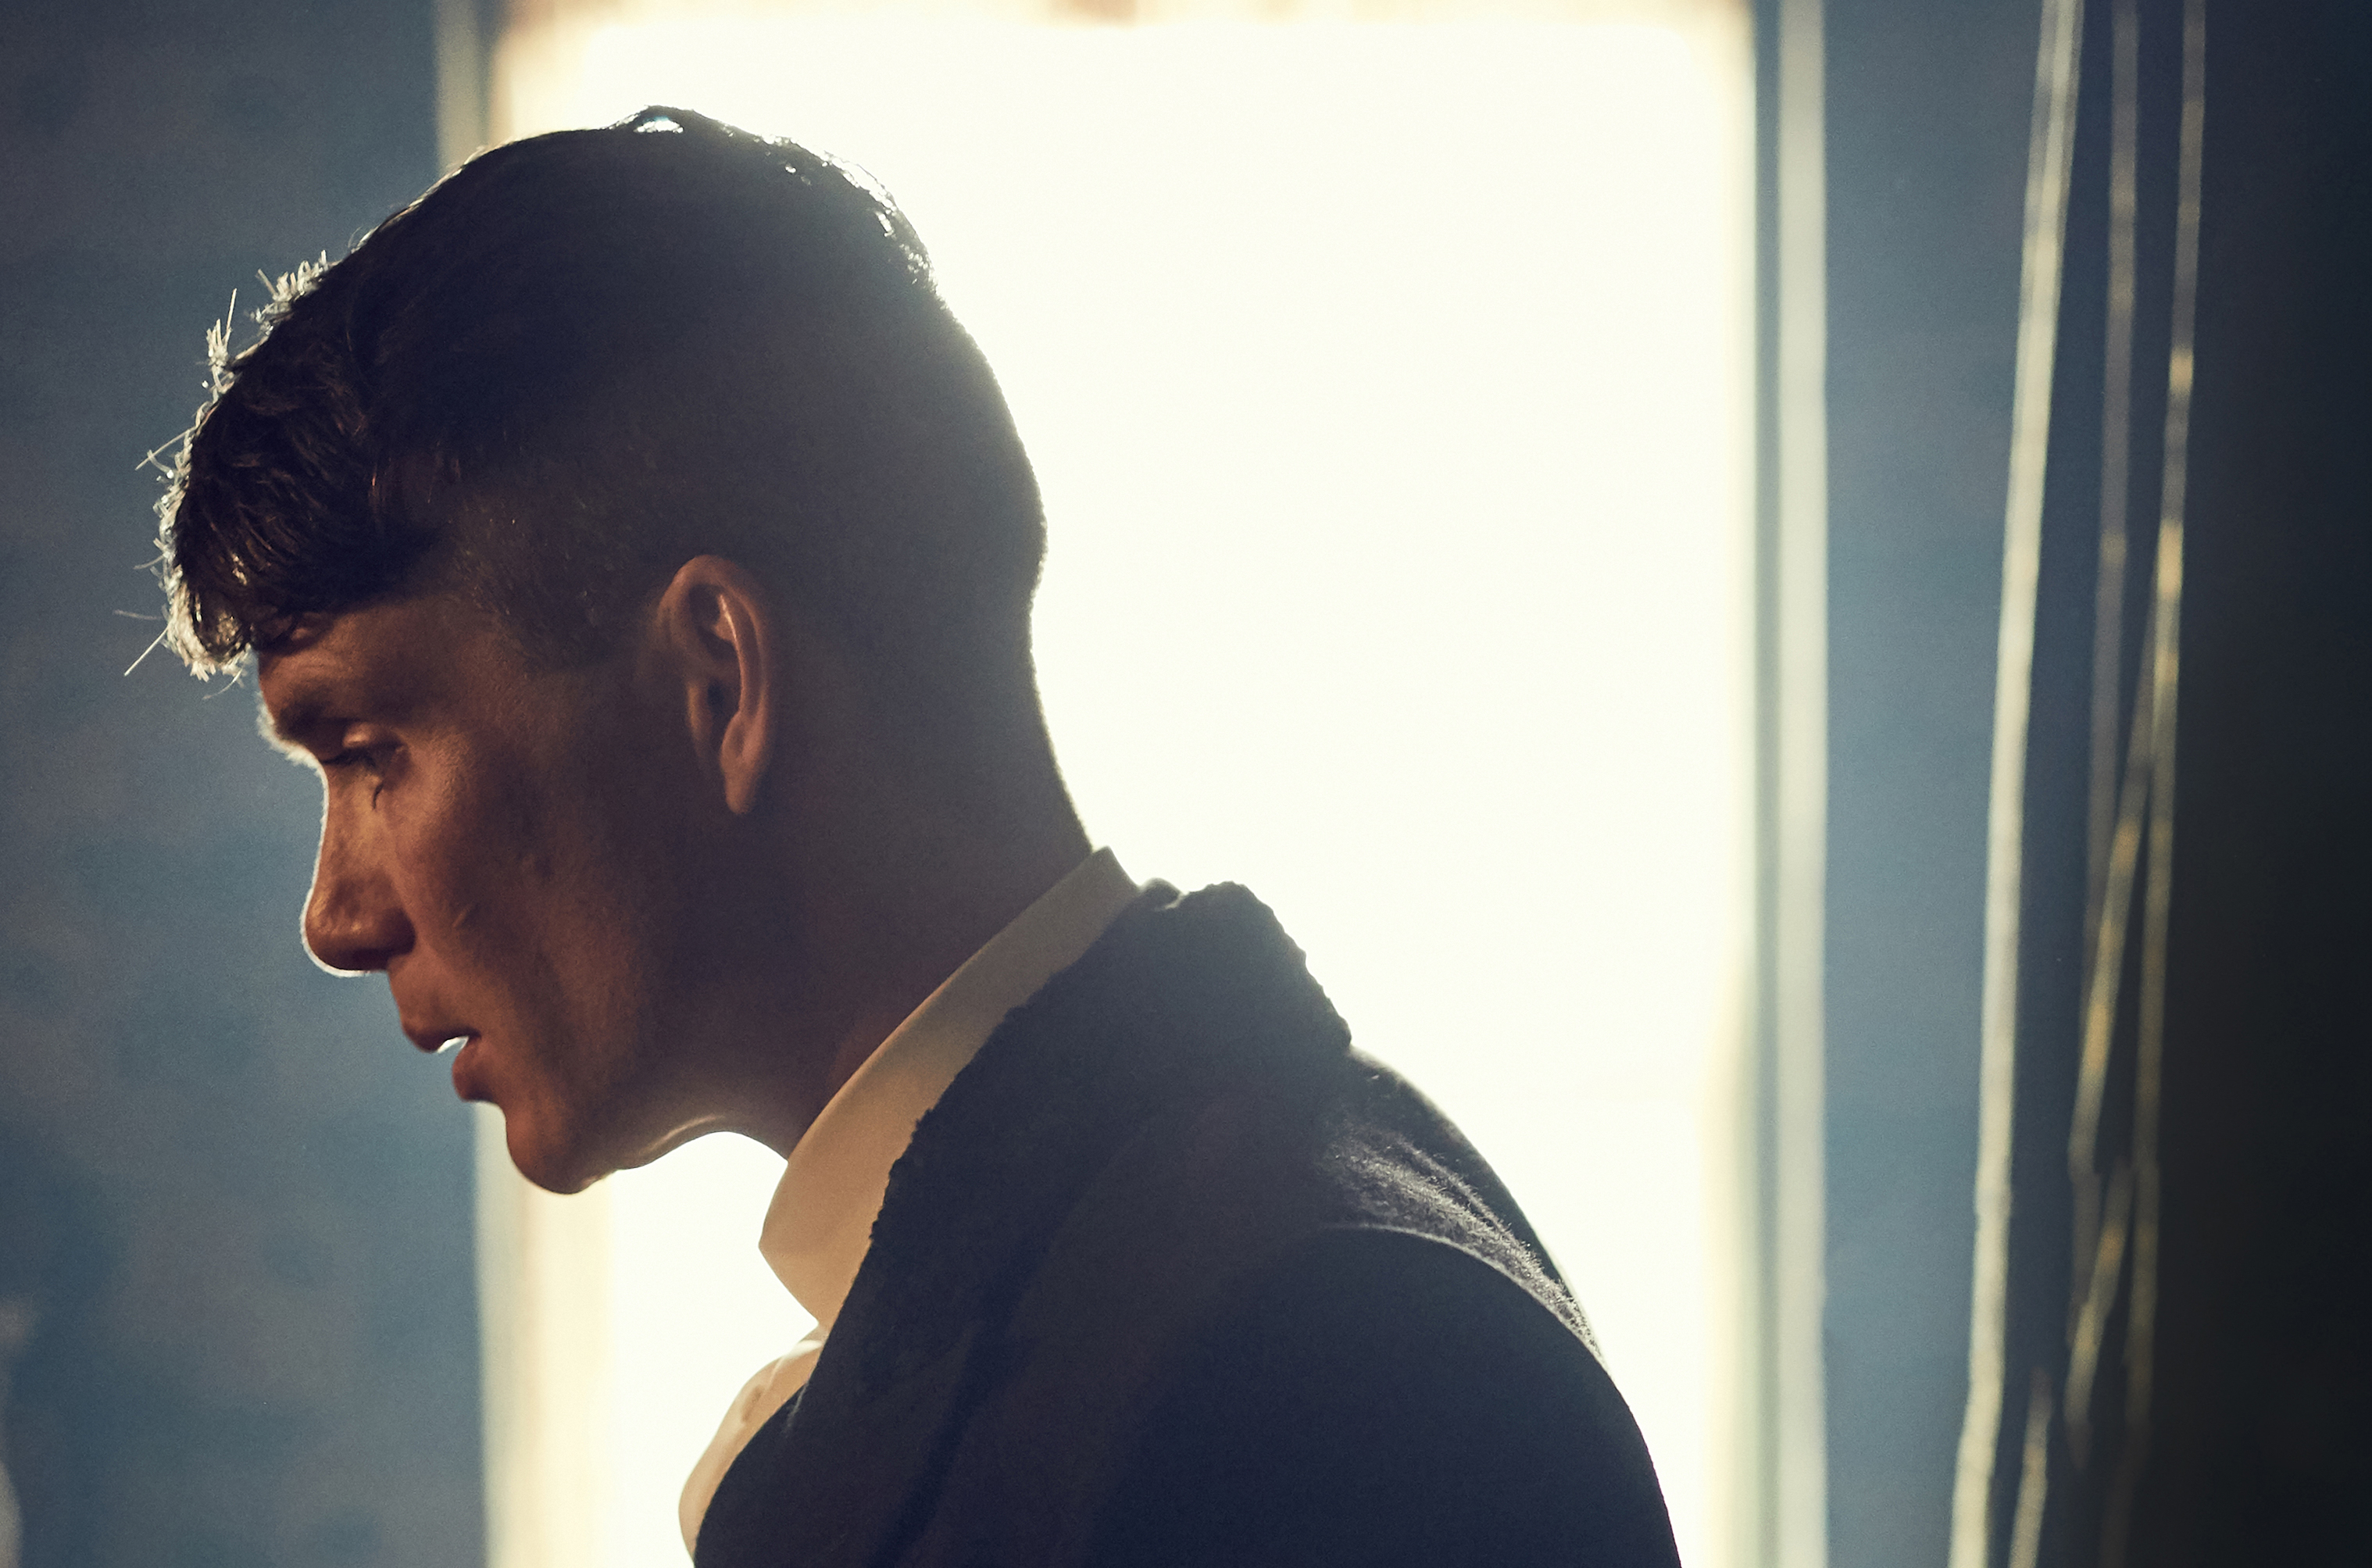 Cillian Murphy stars in Netflix's Peaky Blinders, which was voted the hardest TV show to understand in a subtitles survey